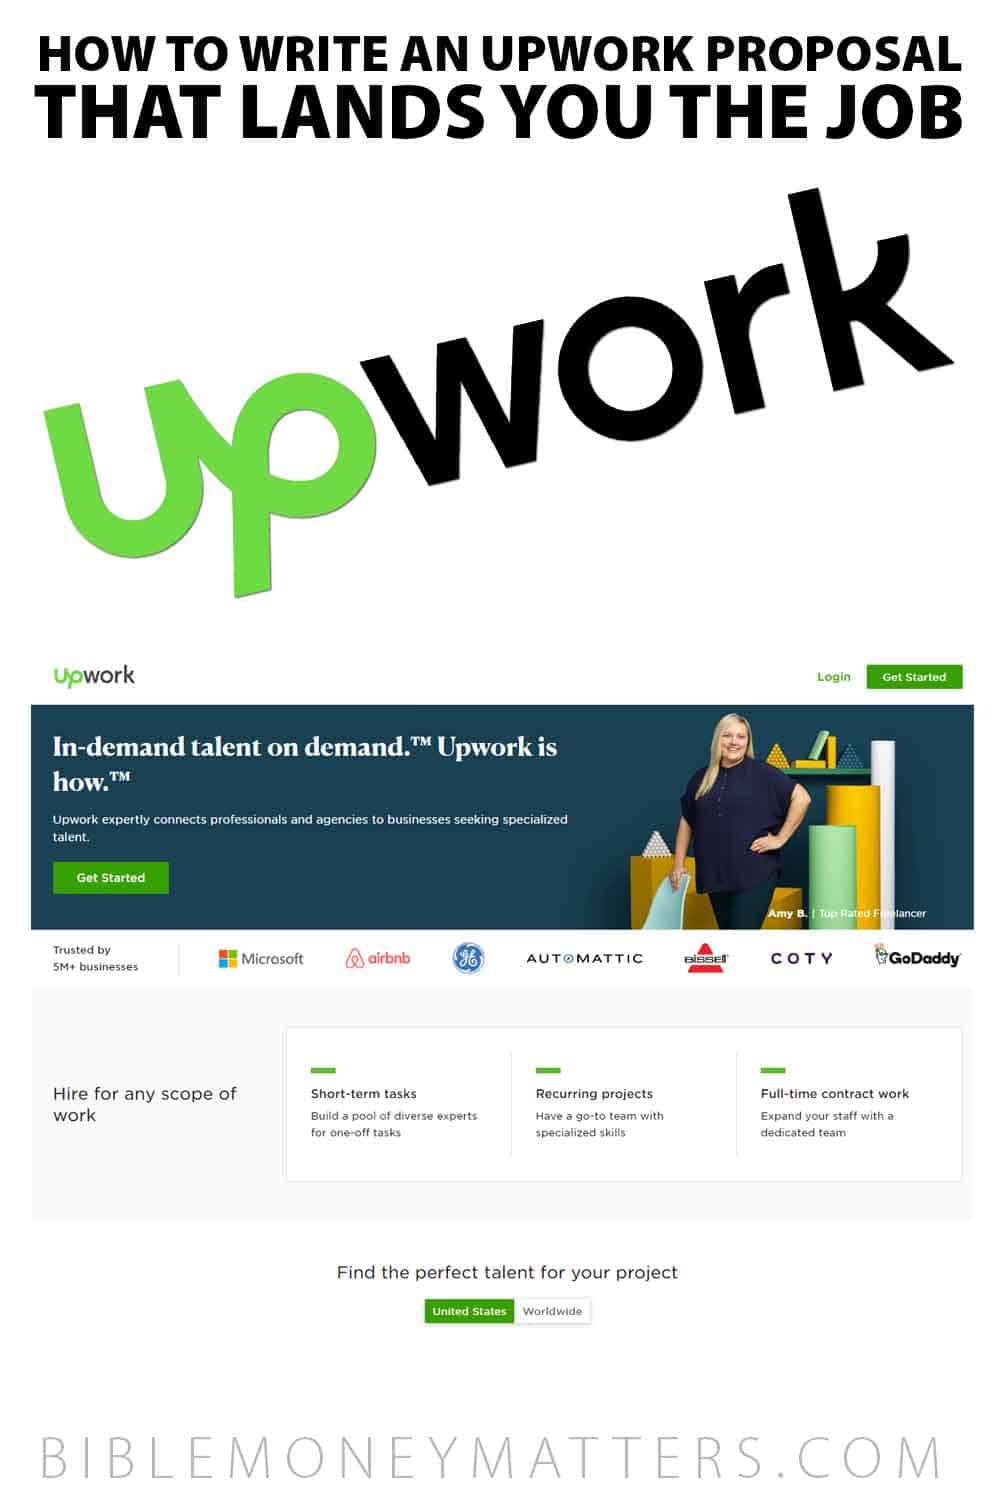 How To Write An Upwork Proposal That Lands You The Job